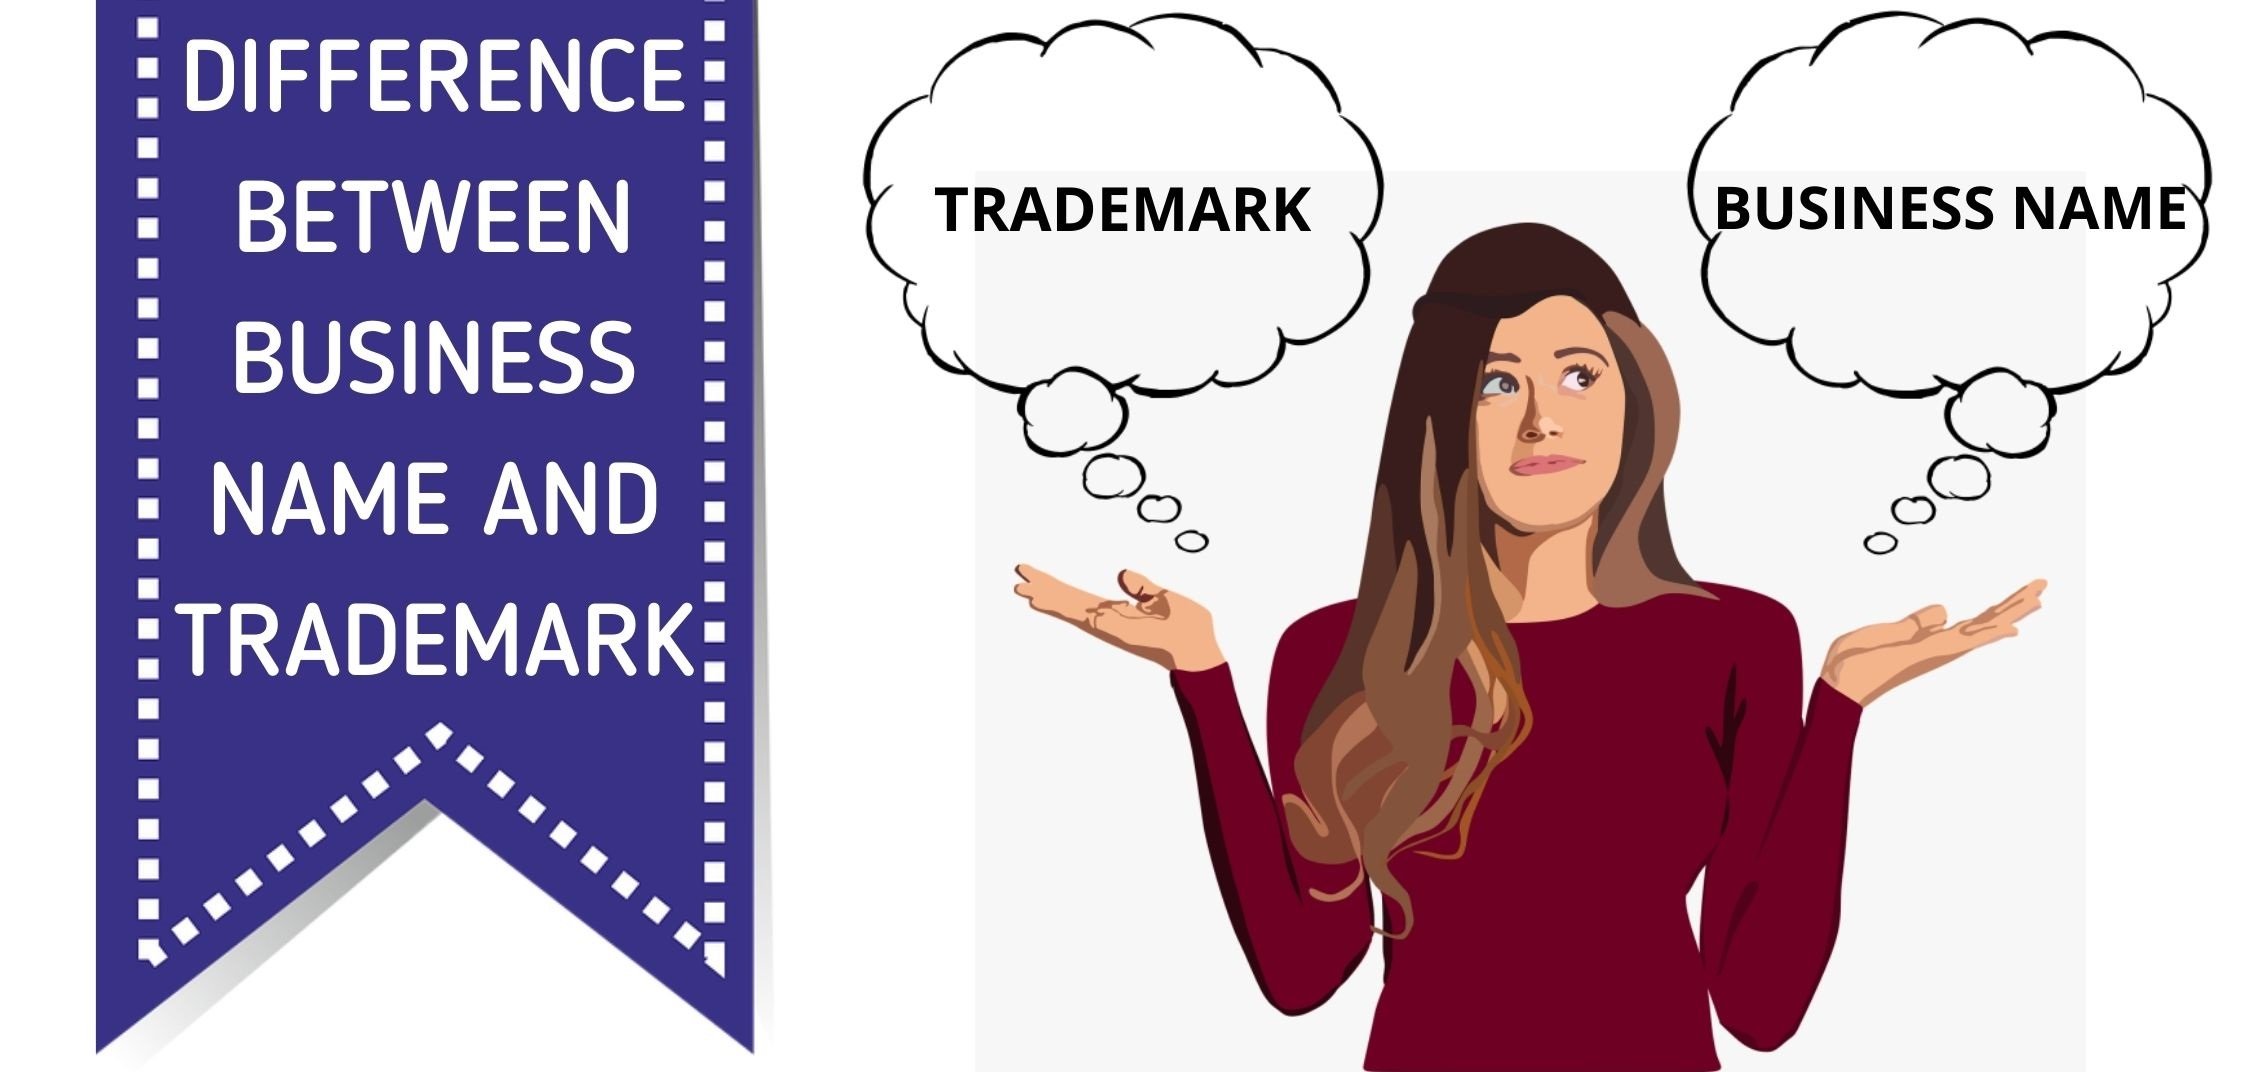 DIFFERENCE BETWEEN BUSINESS NAME AND TRADEMARK